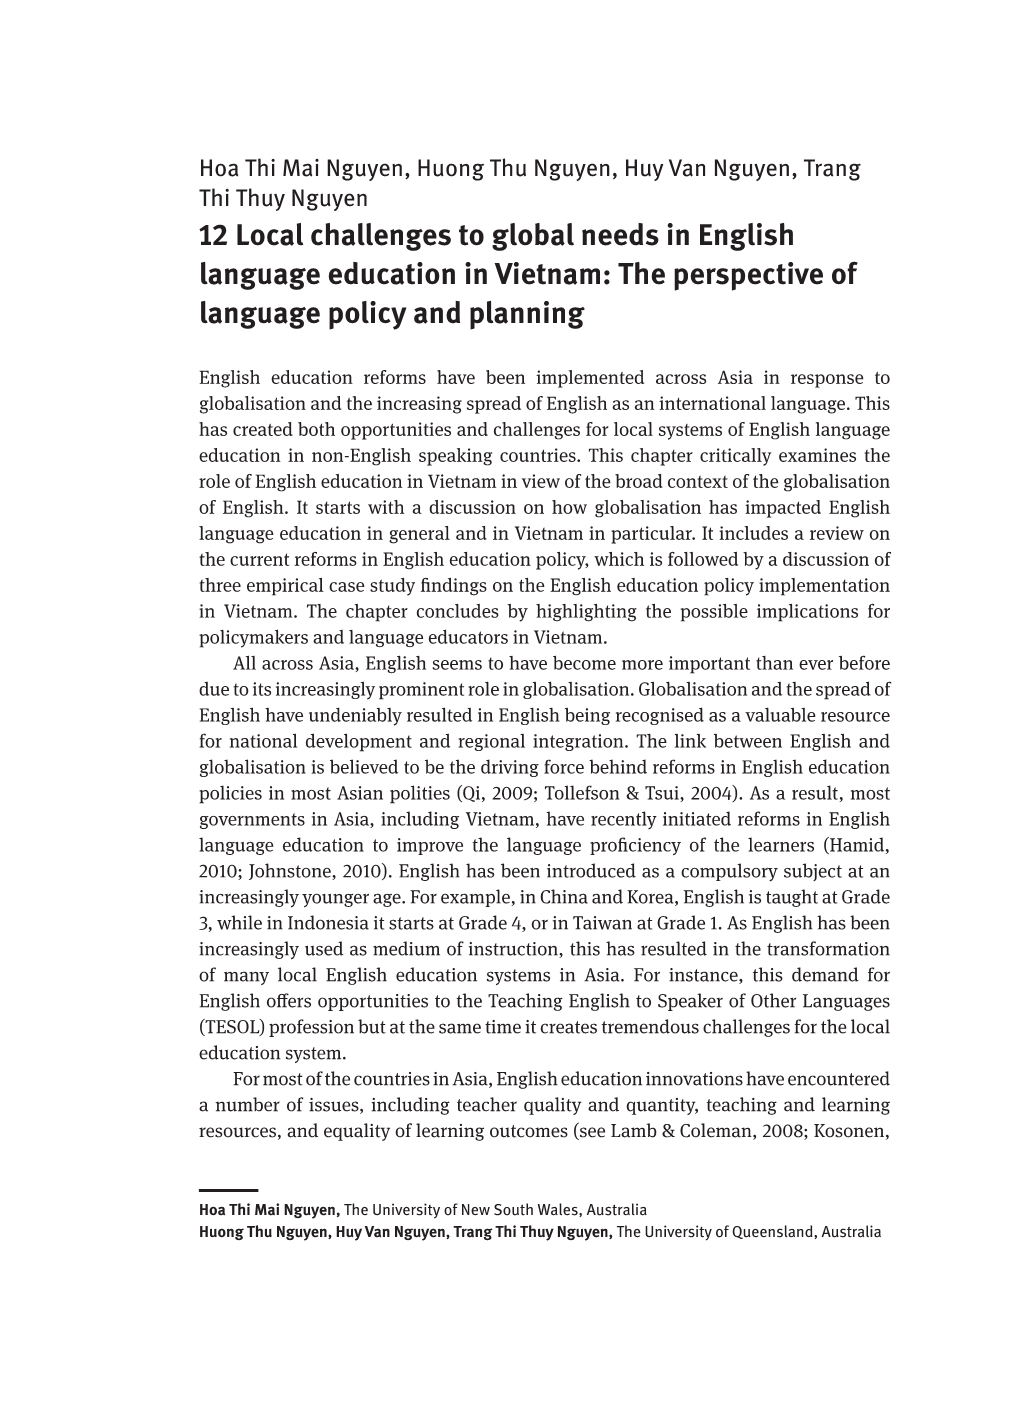 12 Local Challenges to Global Needs in English Language Education in Vietnam: the Perspective of Language Policy and Planning